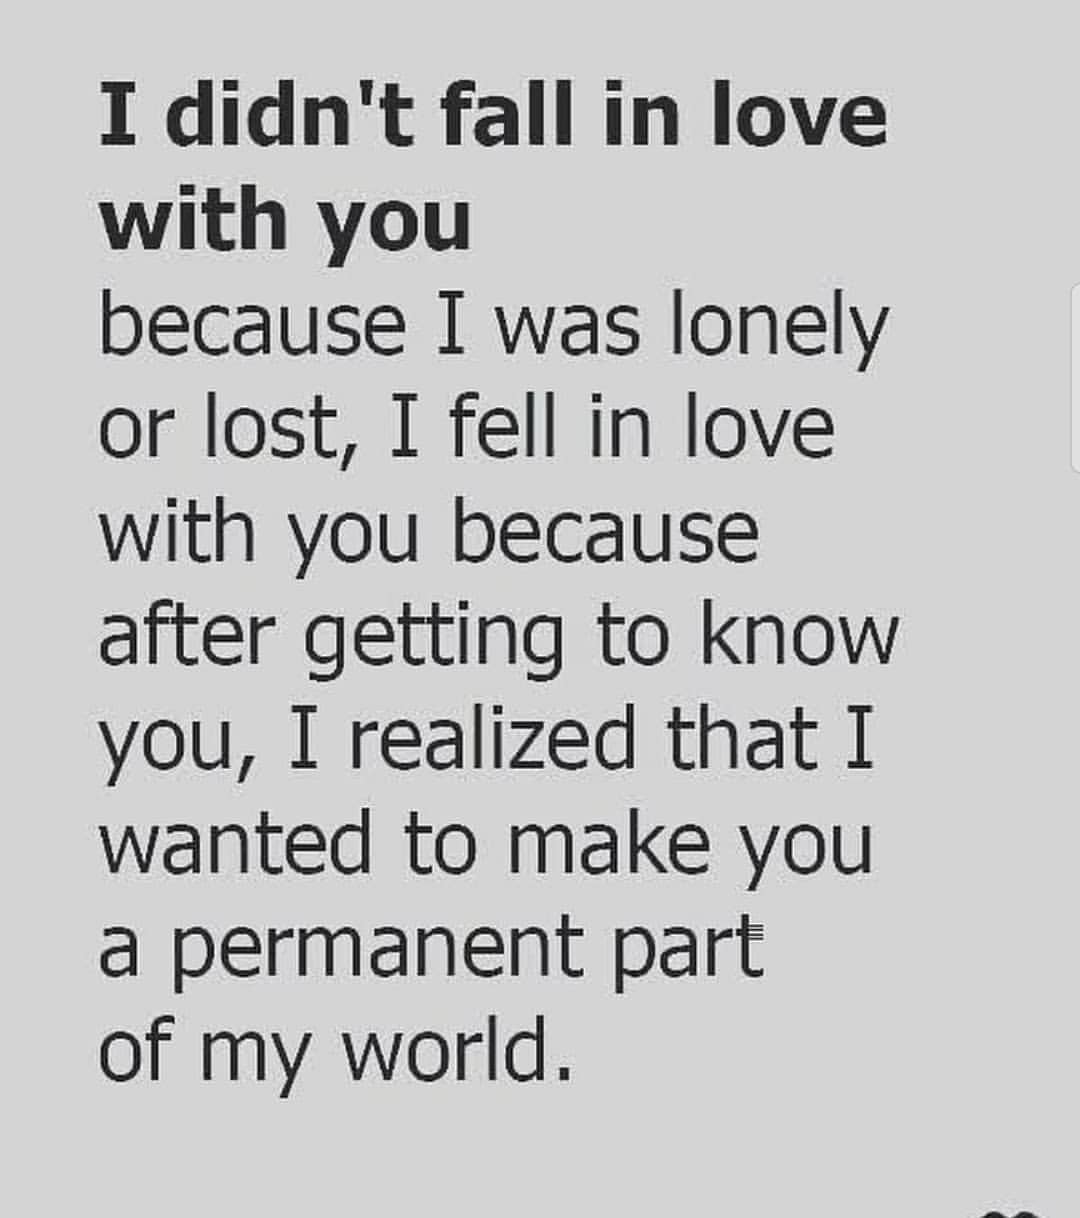 I didn't fall in love with you because I was lonely or lost, I fell in love with you because after getting to know you, I realized that I wanted to make you a permanent part of my world.